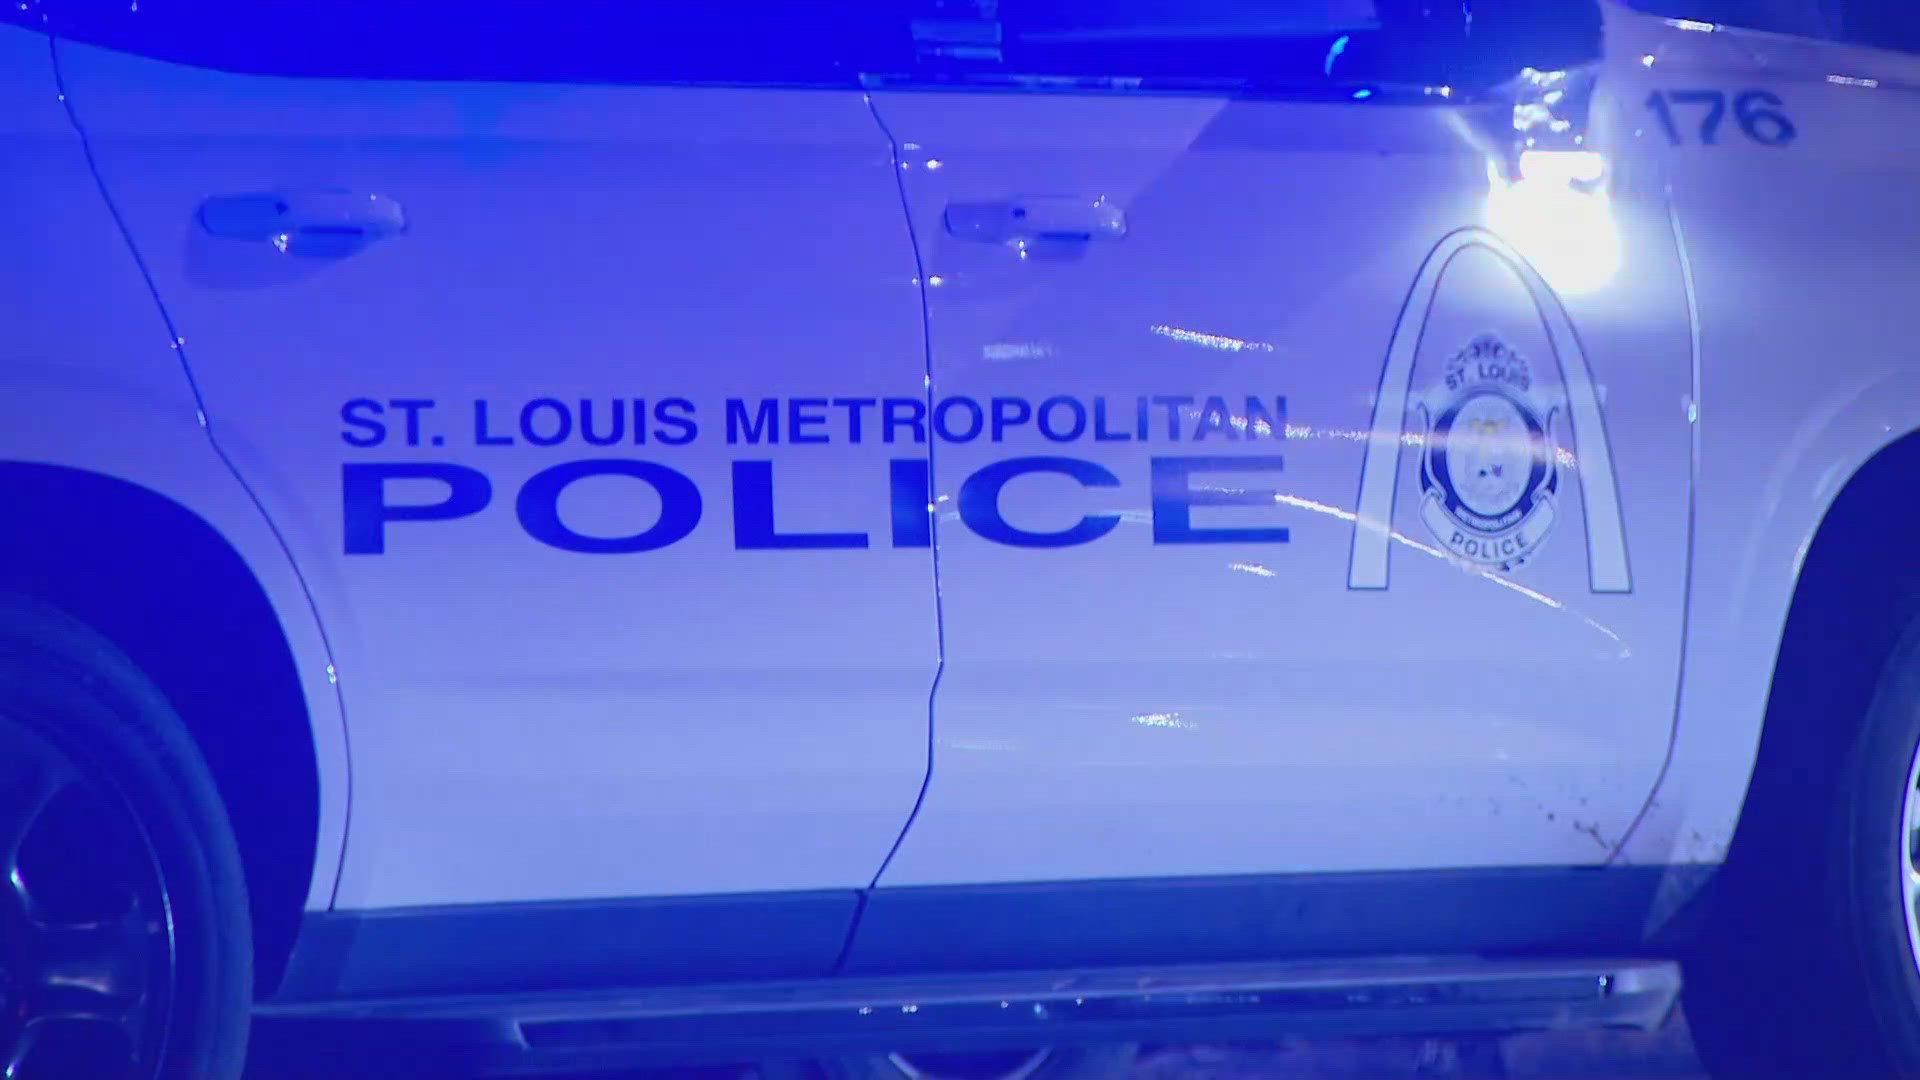 Several St. Louis-area citizens and public officials are fed up with the ongoing gun violence that's plaguing the city. Records show it involves adults and teens.